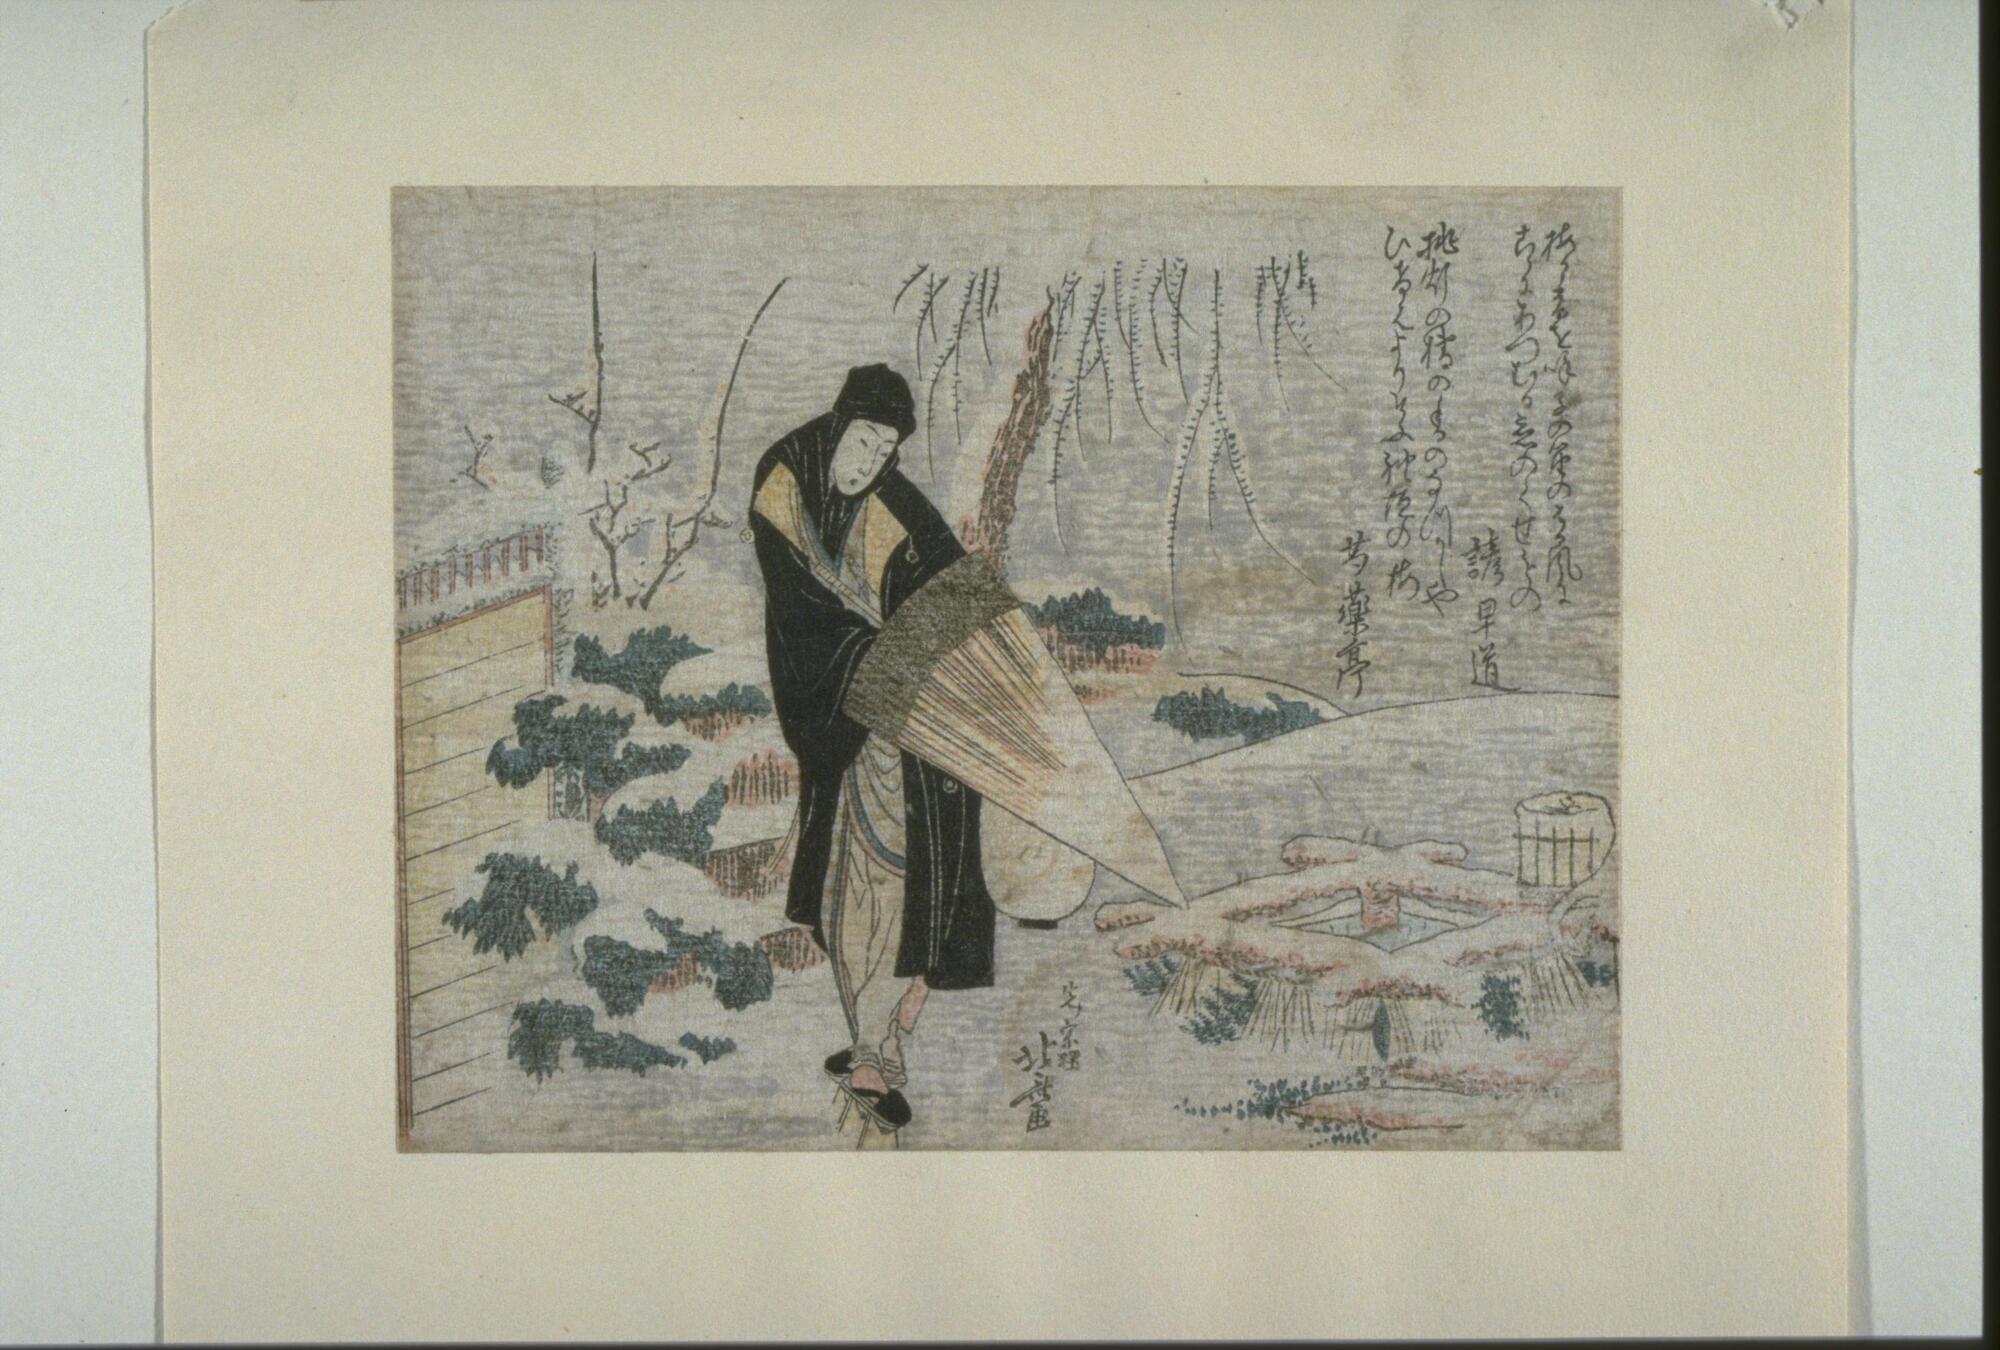 The print depicts a figure in black walking in the snow with an umbrella. The snow covers the road, the well and the trees. Inscriptions of two poems appear on the upper right-hand corner, and the artist's signature can be found on the bottom edge of the print.